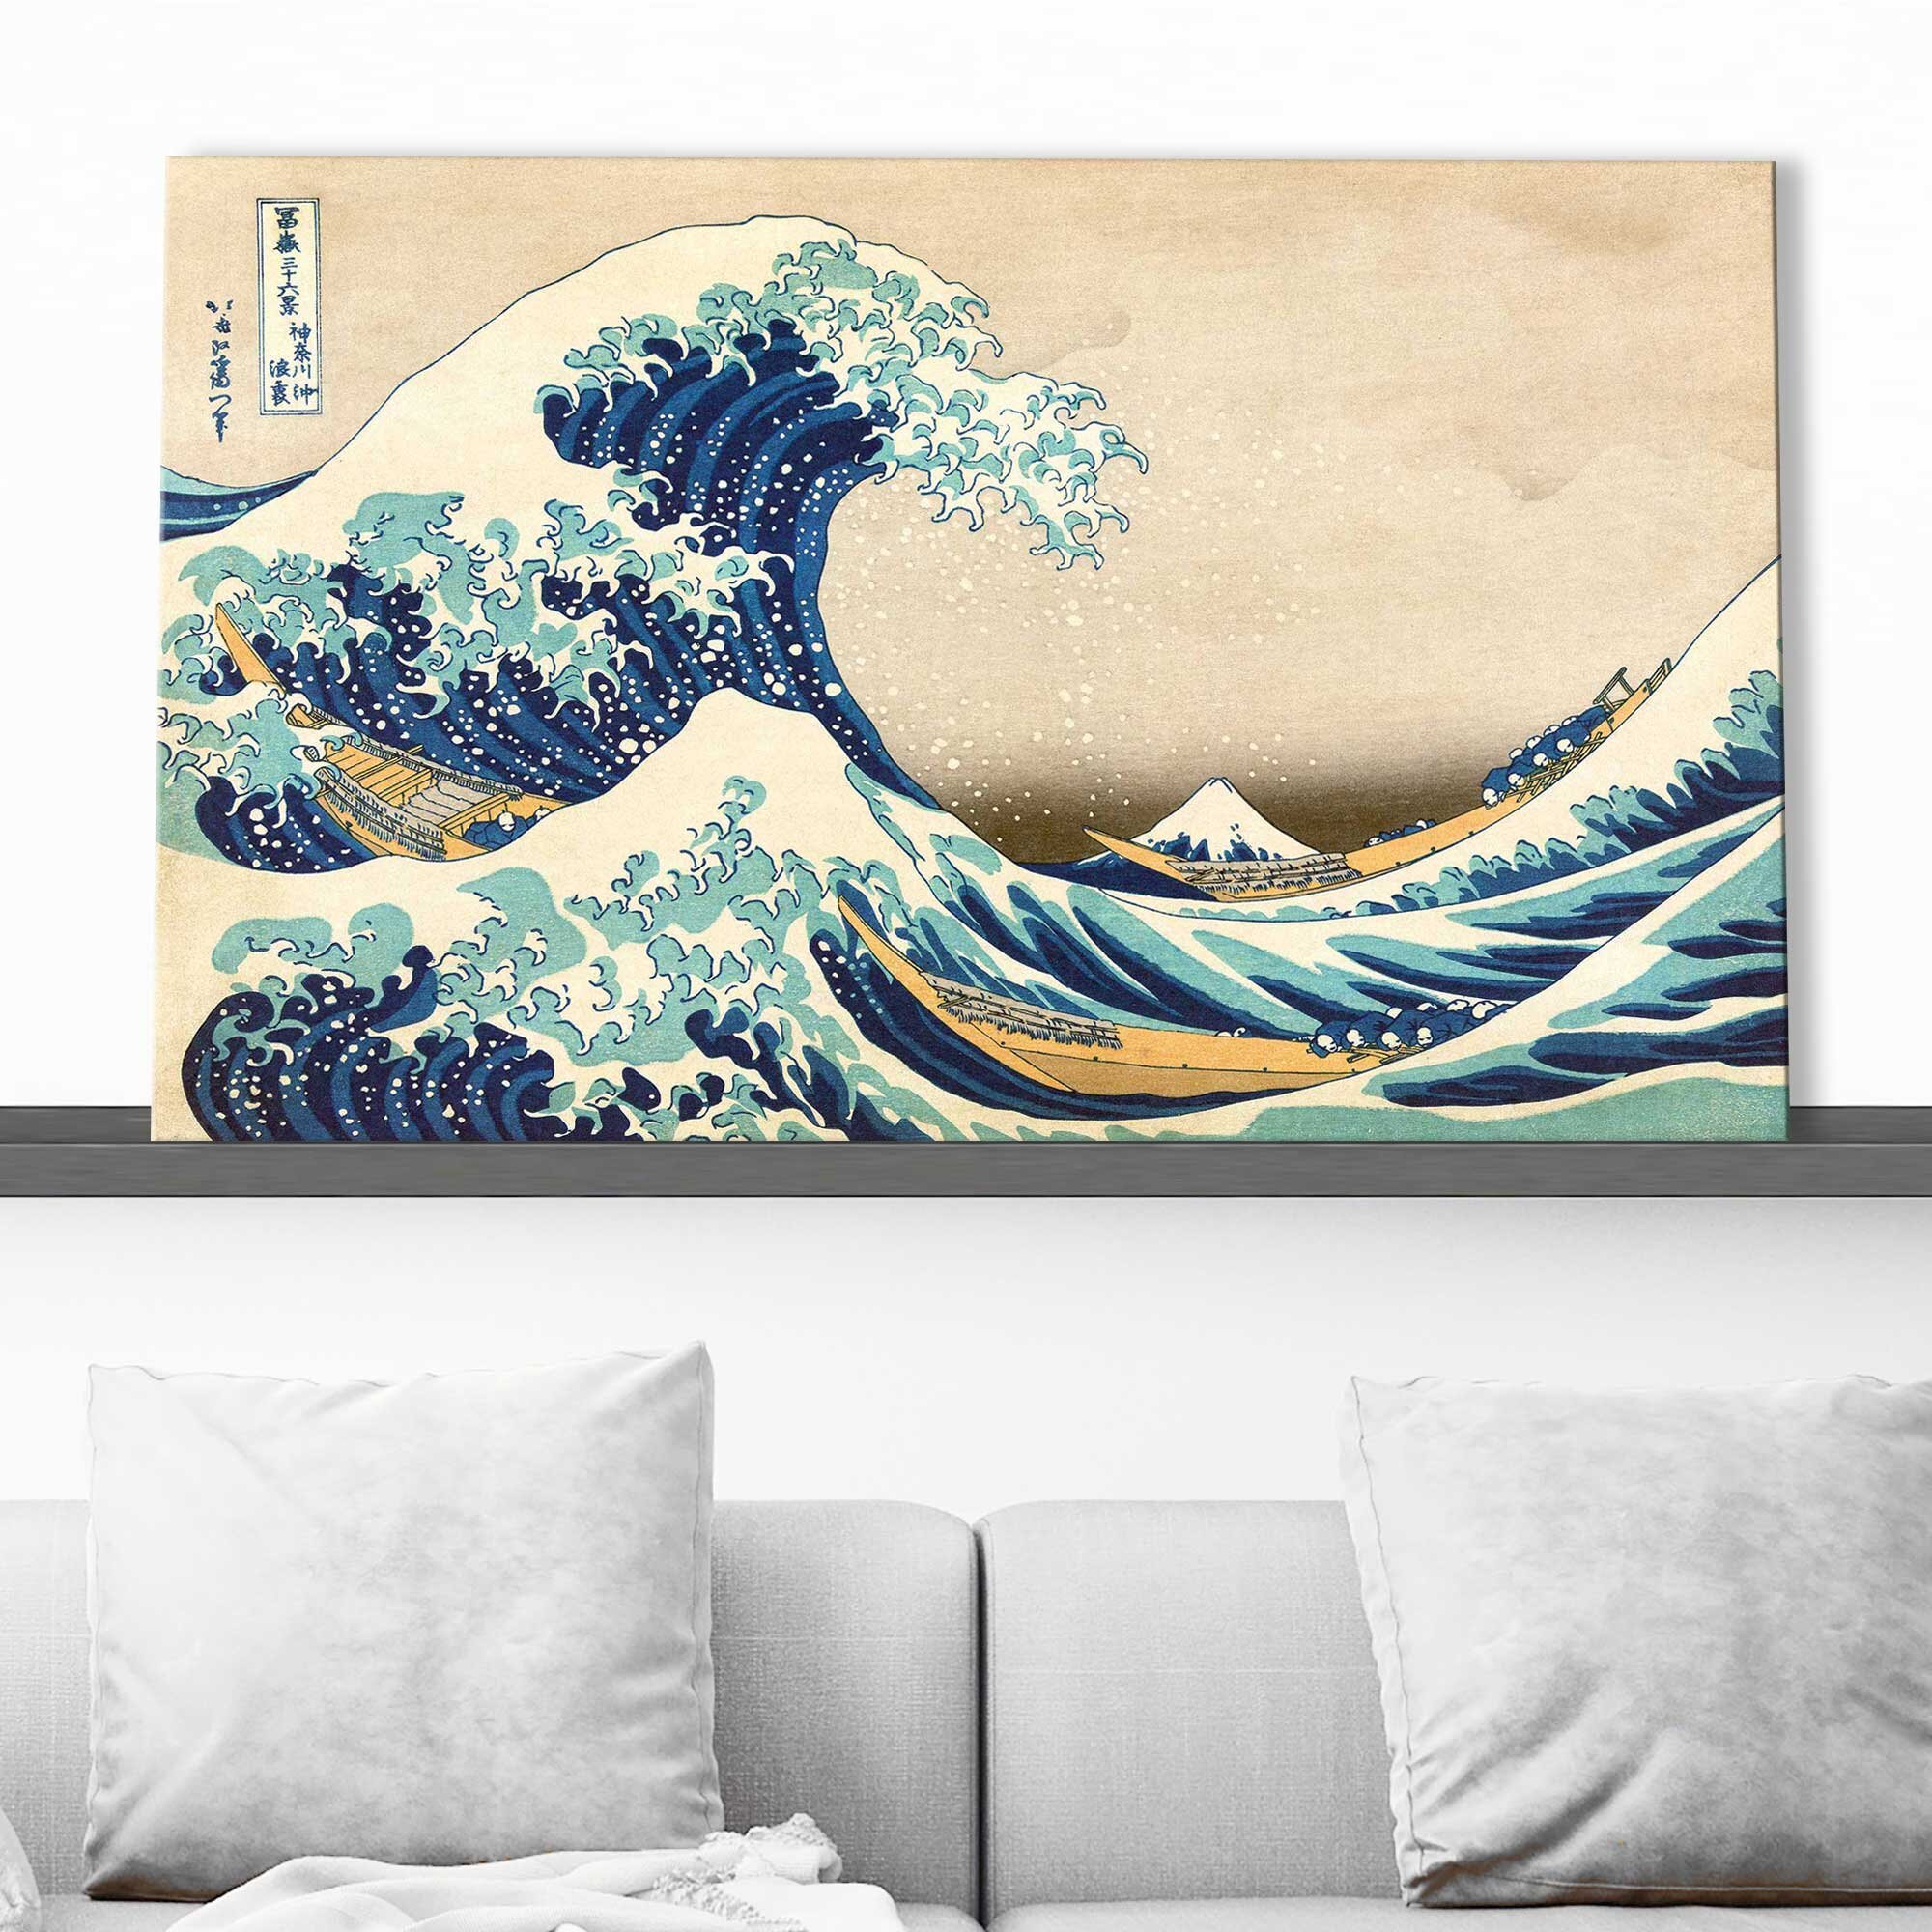 Paint By Number Kit for Adults - The Great Wave Off Kanagawa - DIY Painting